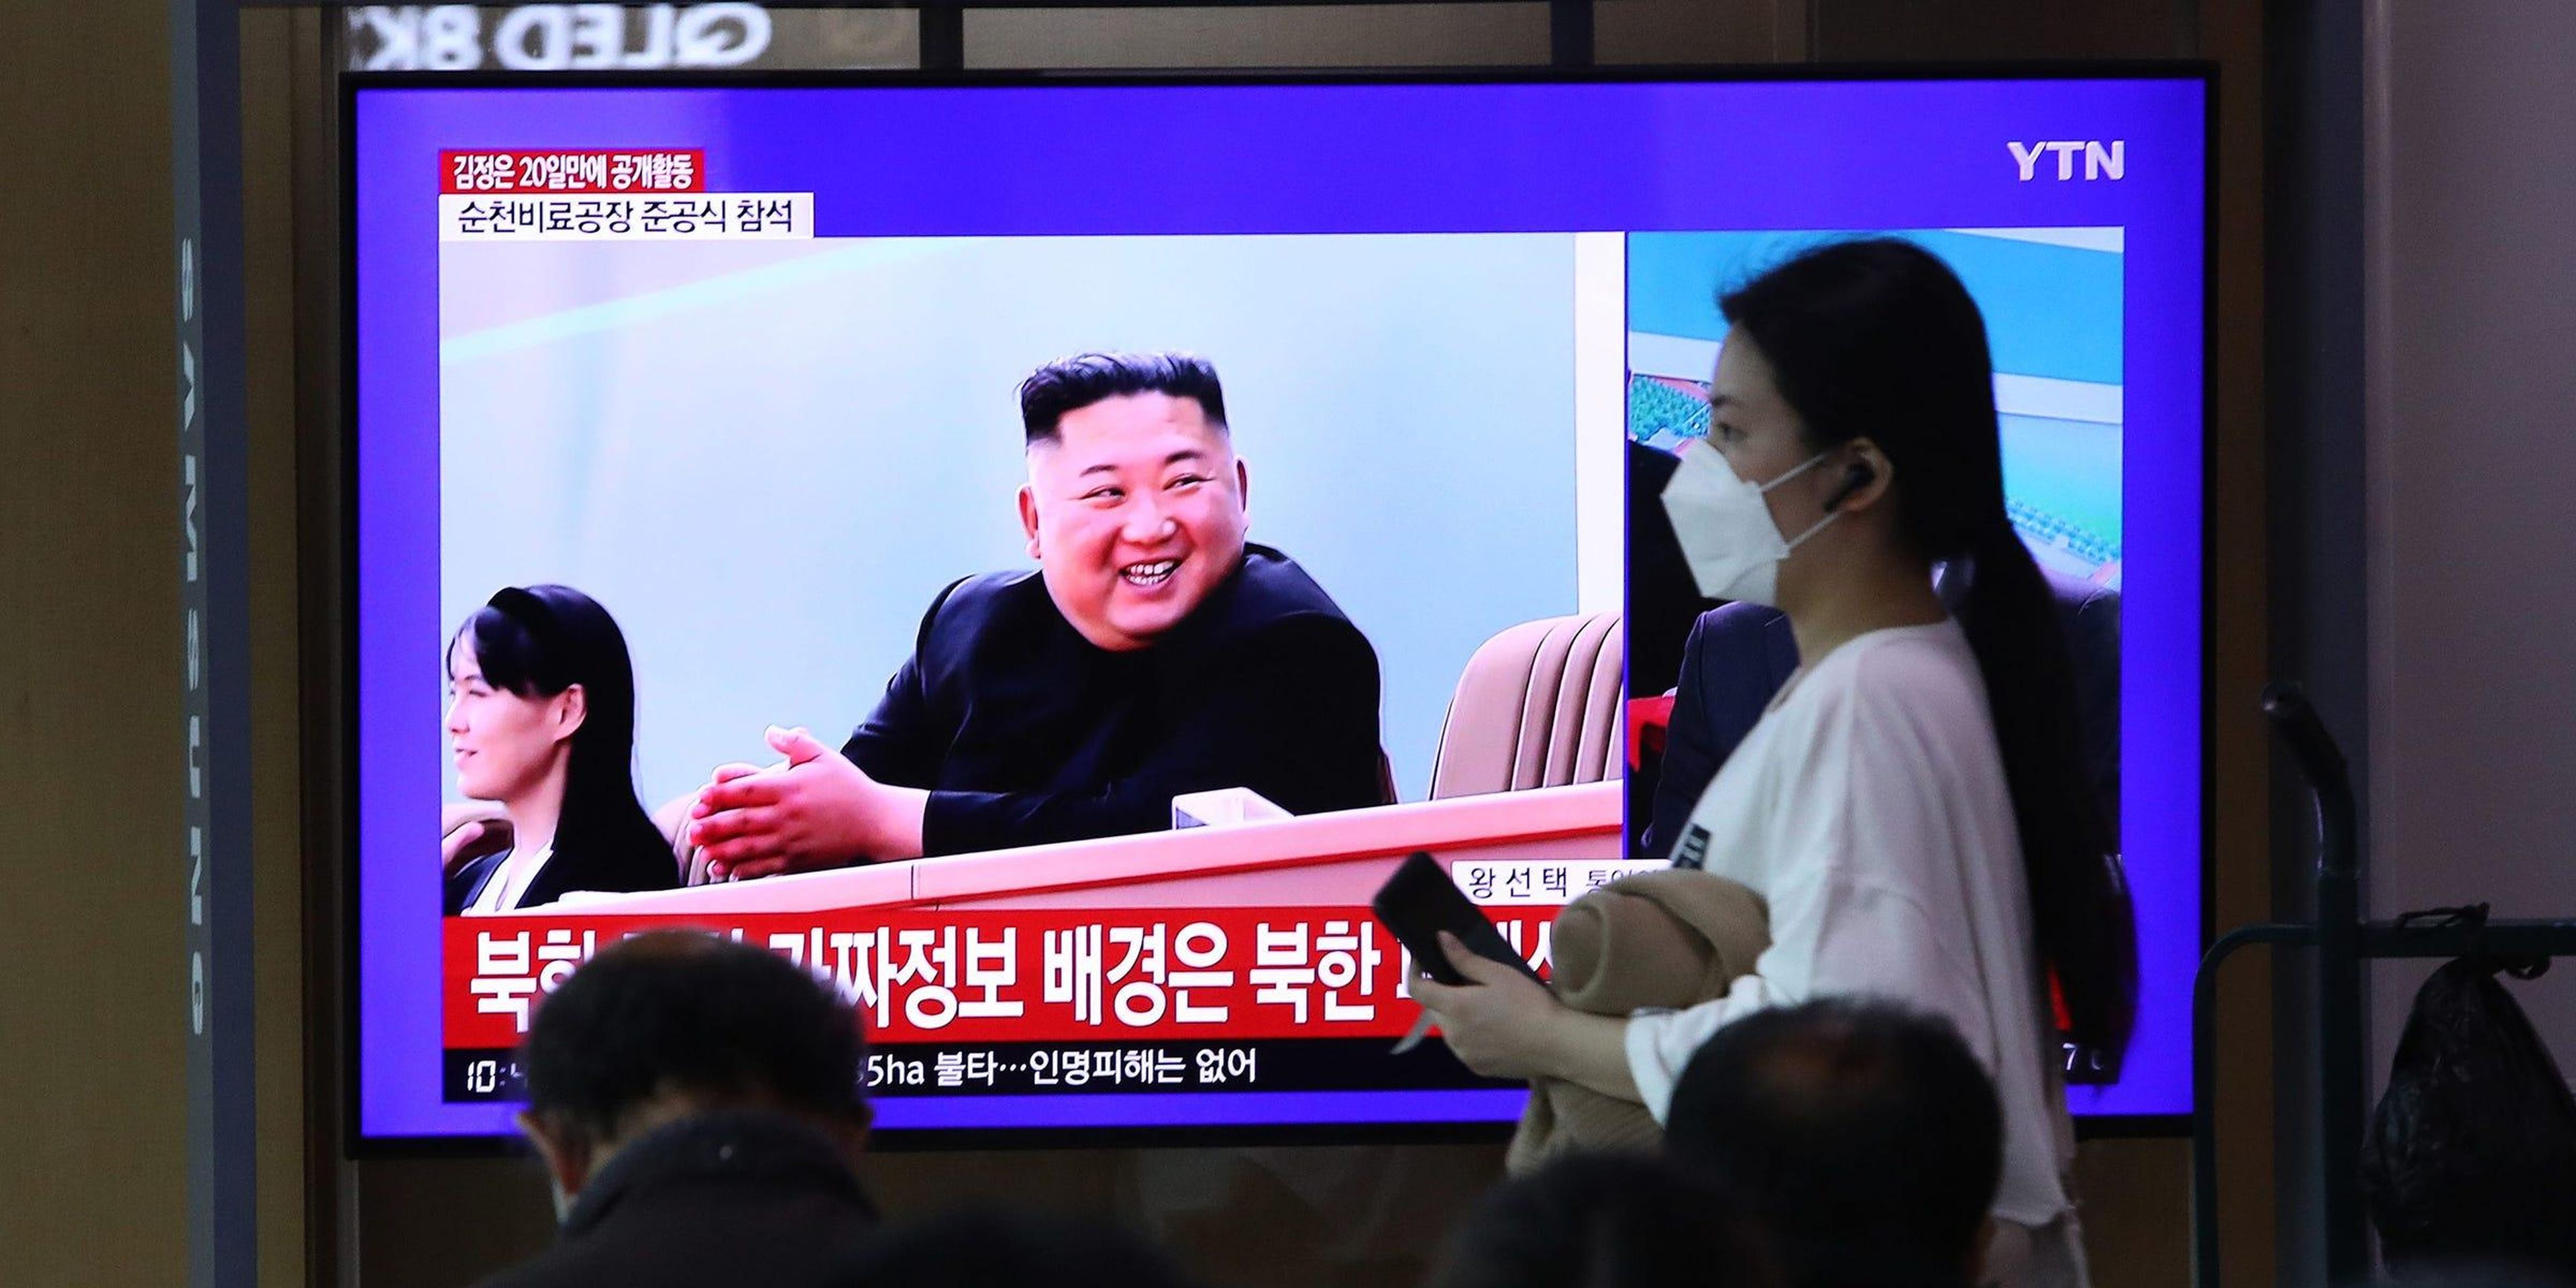 People watch a television broadcast reporting an image of North Korean leader Kim Jong Un on May 2, 2020. Chung Sung-Jun/Getty Images